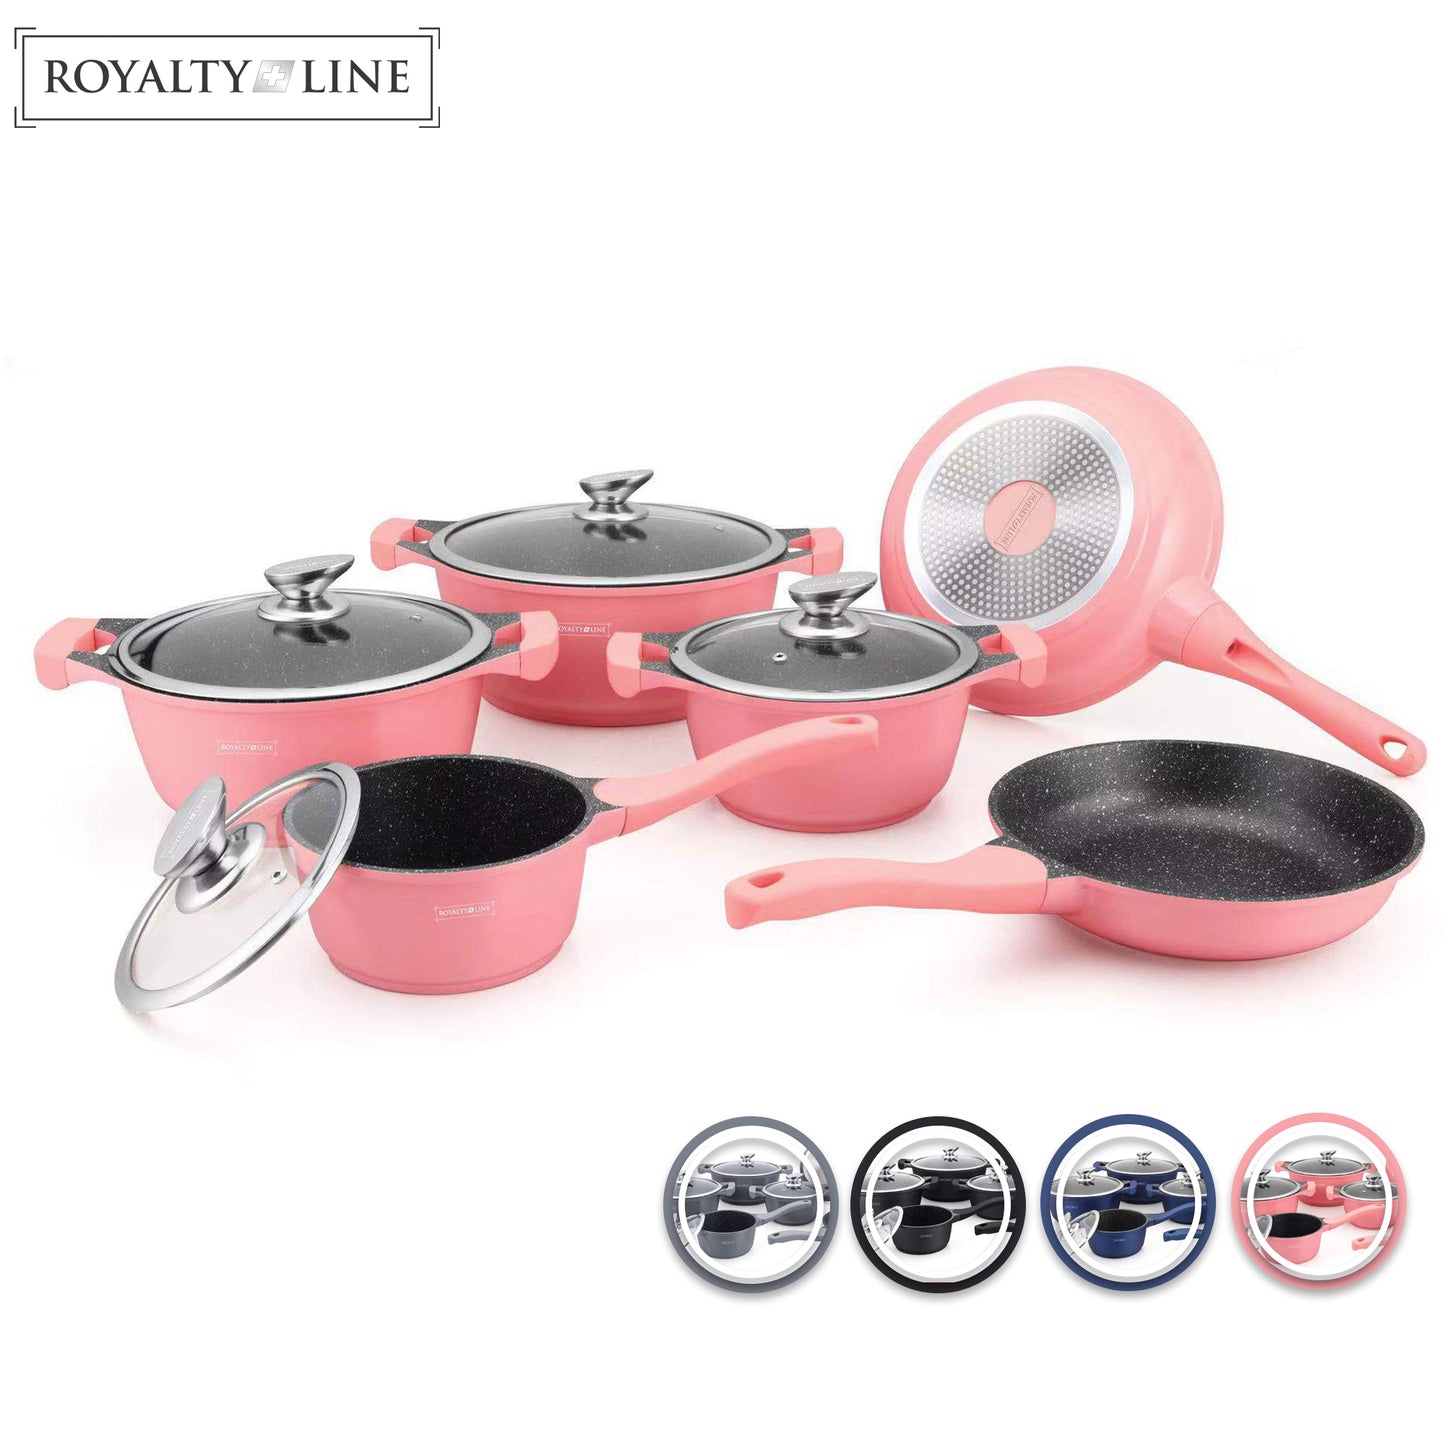 Royalty Line 10 Pieces Pot with Ceramic Coating Gray